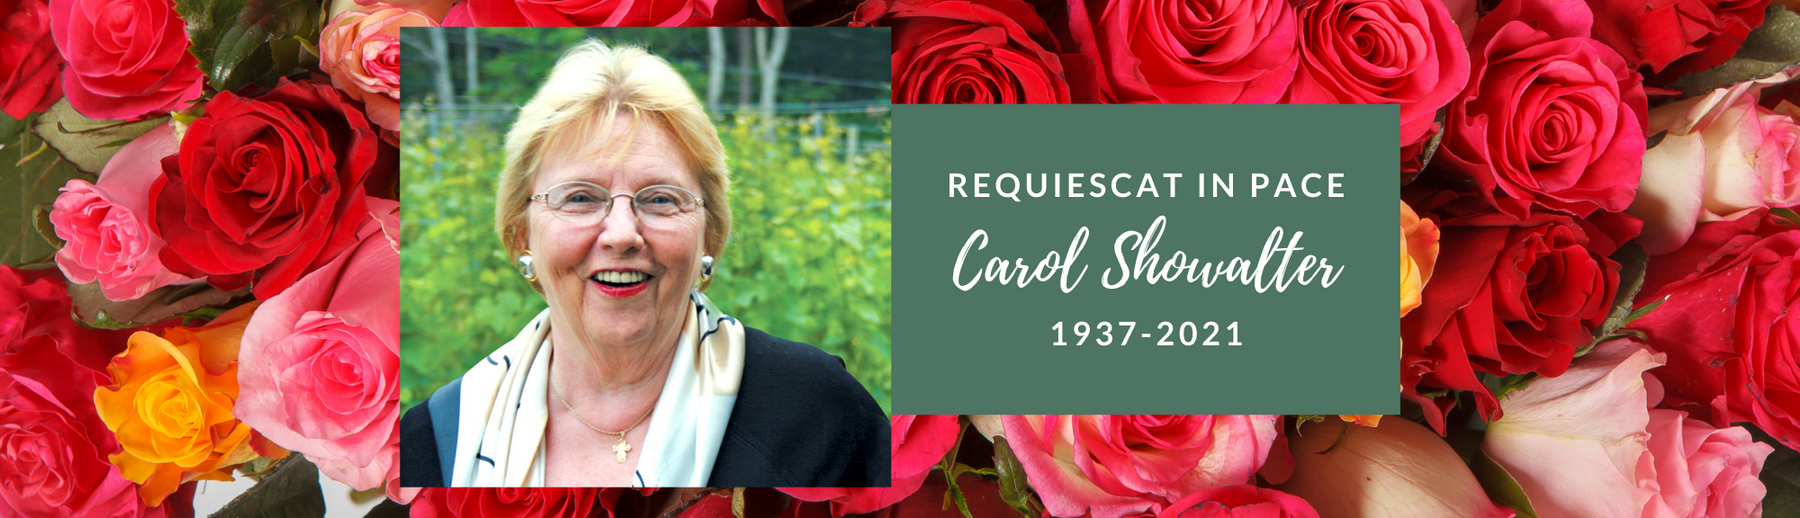 In gratitude for the life of Carol Showalter, one of the original members of Paraclete Press and founder of the national 3D/Your Whole Life program